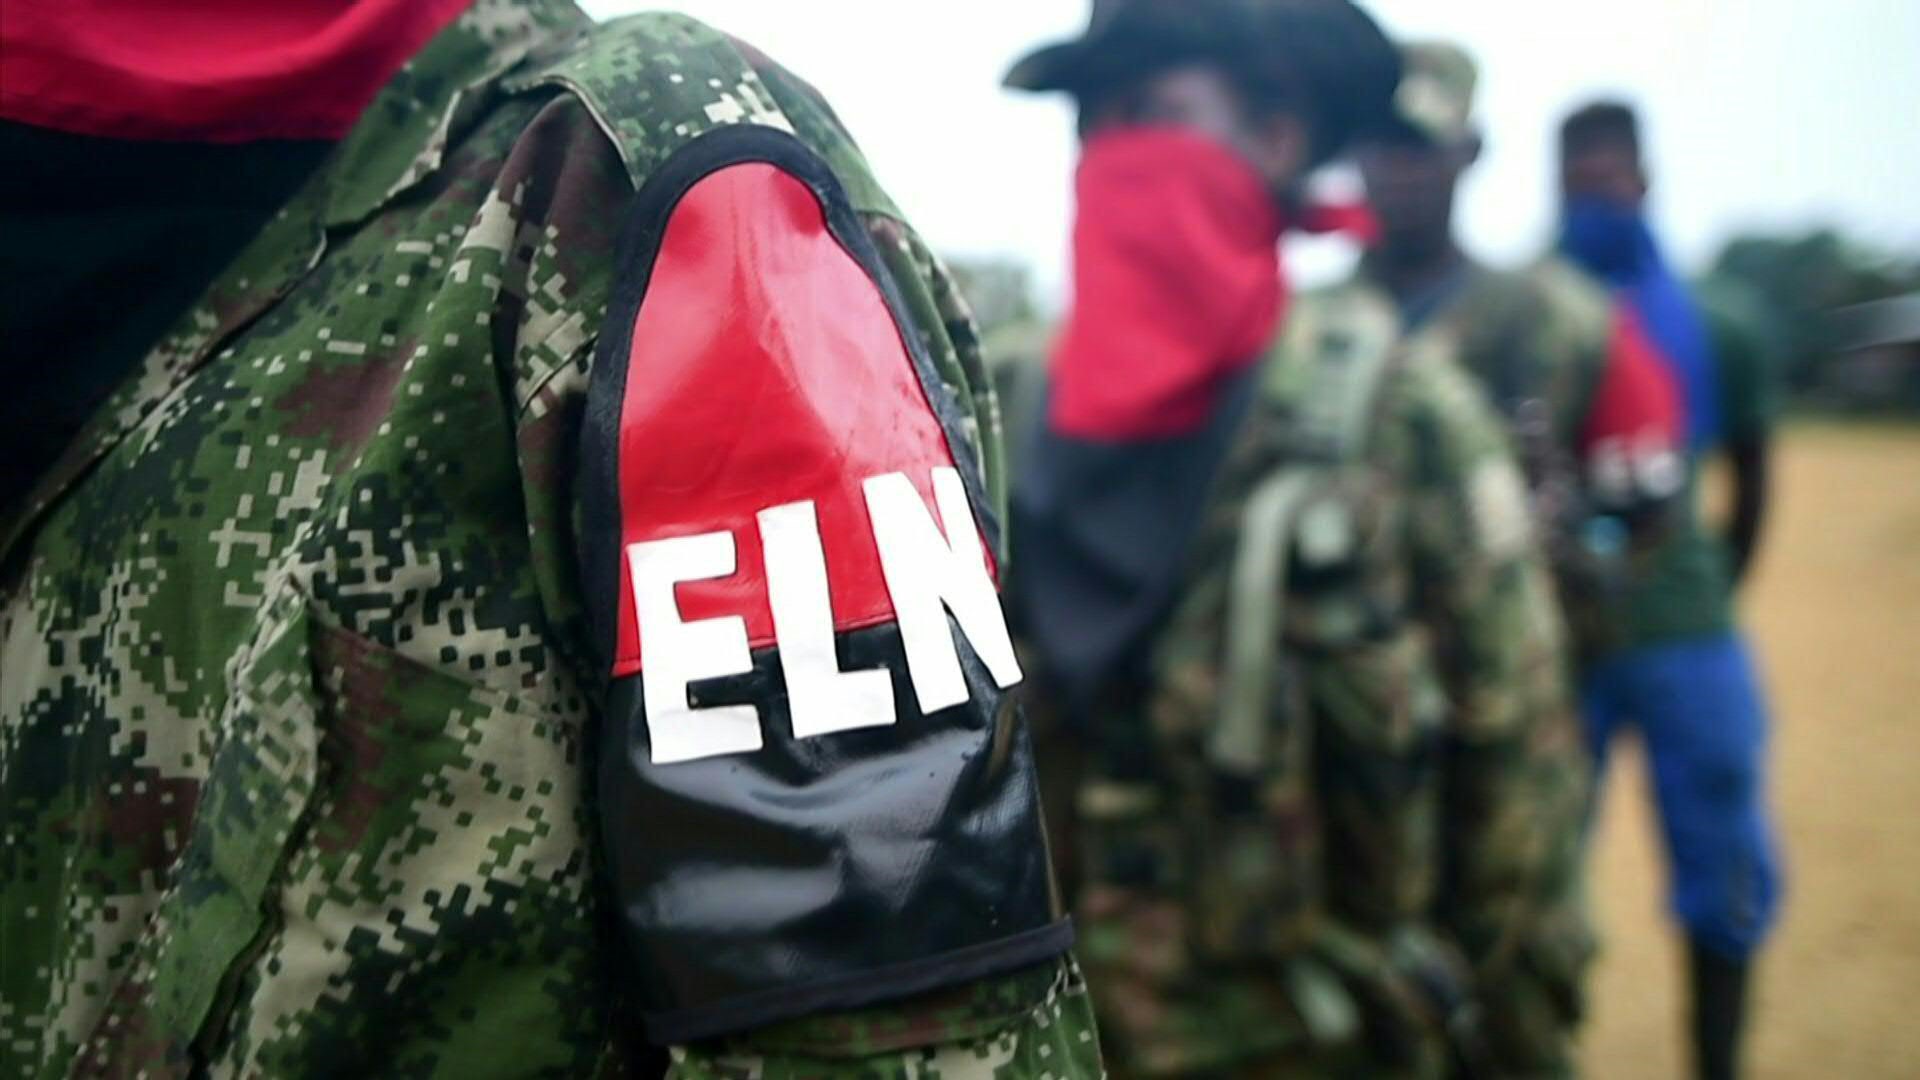 ELN Colombia paz